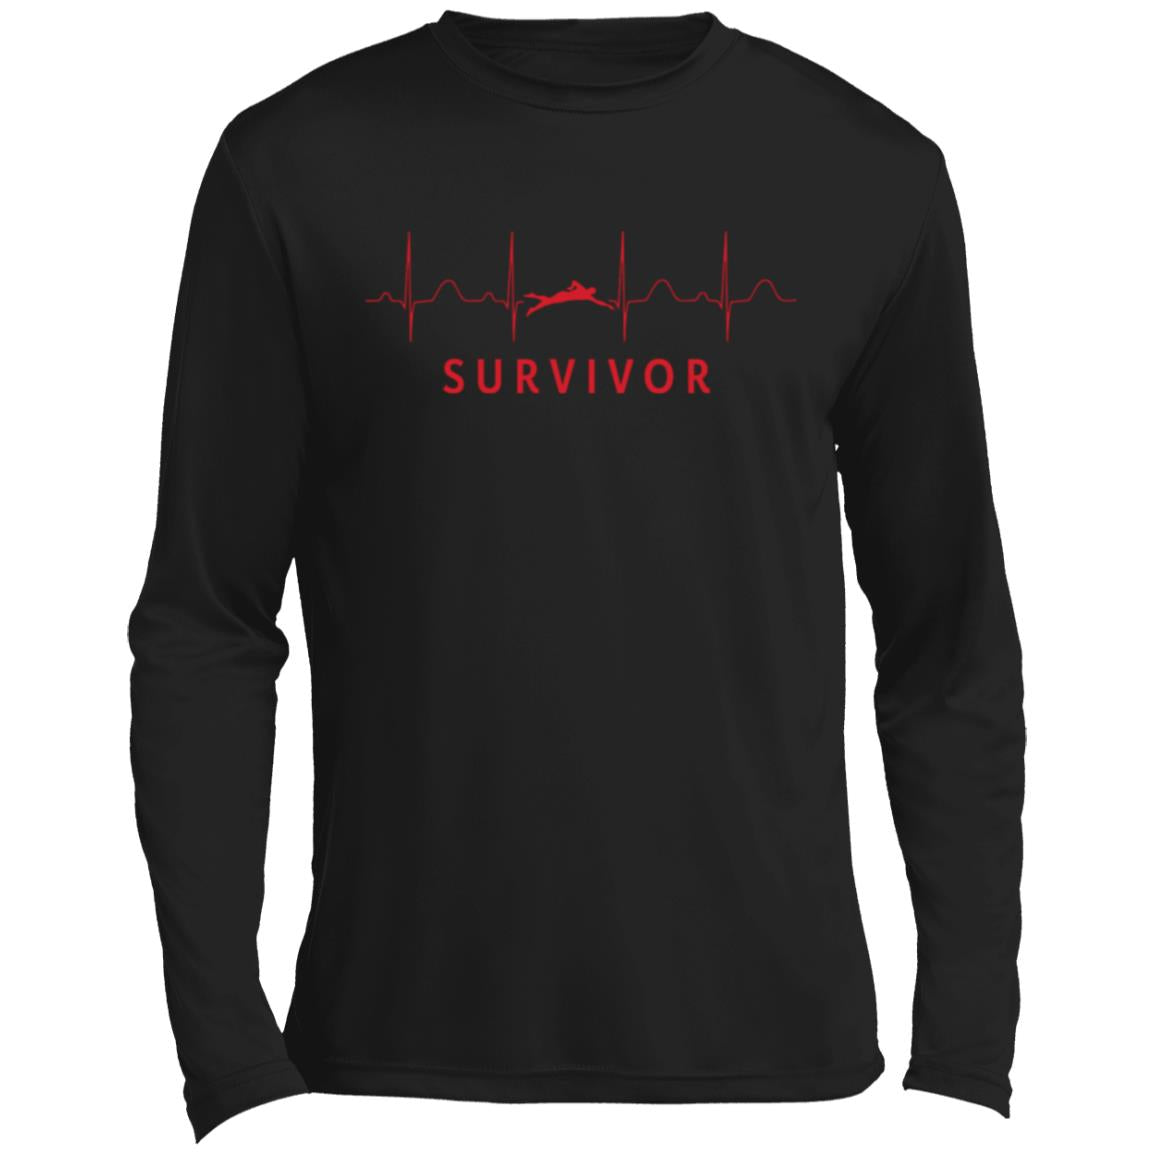 Black long-sleeve tee with "SURVIVOR" text along with a swimmer icon with EKG lines behind